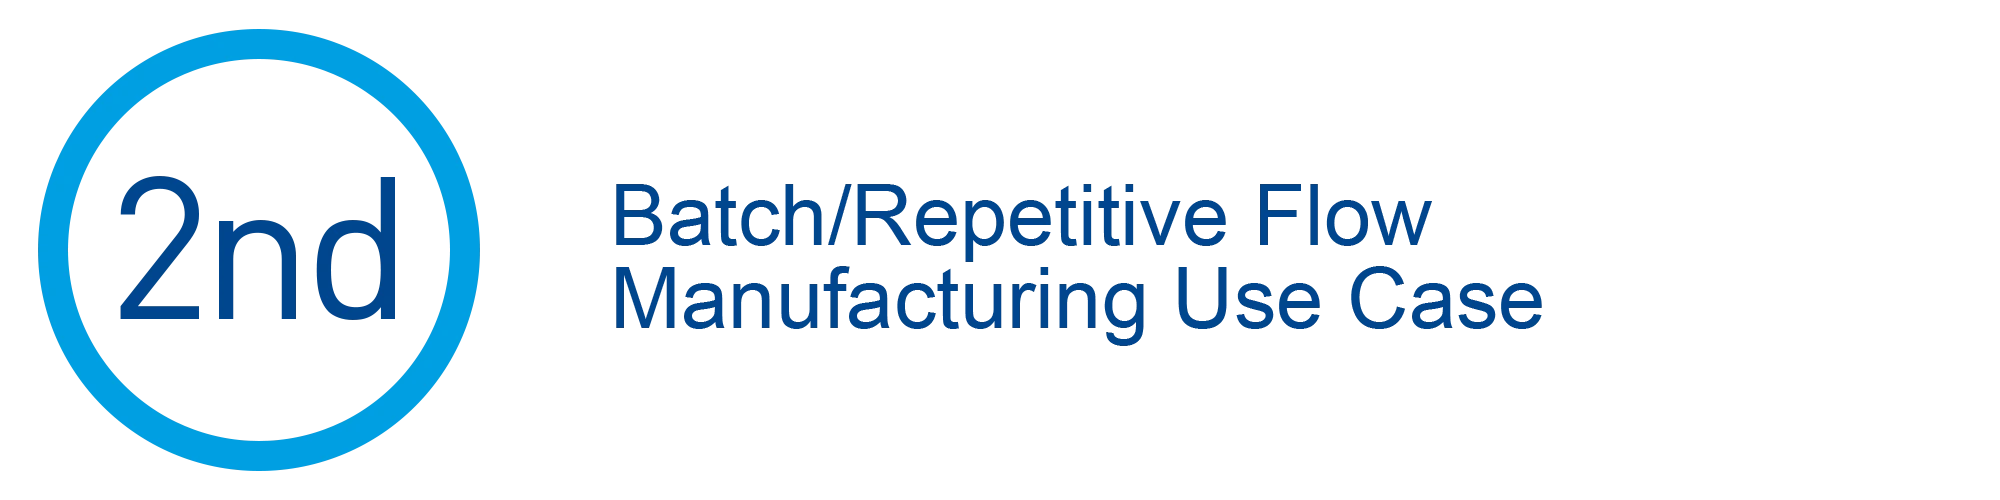 2nd Batch/Repetive Flow Manufacturing